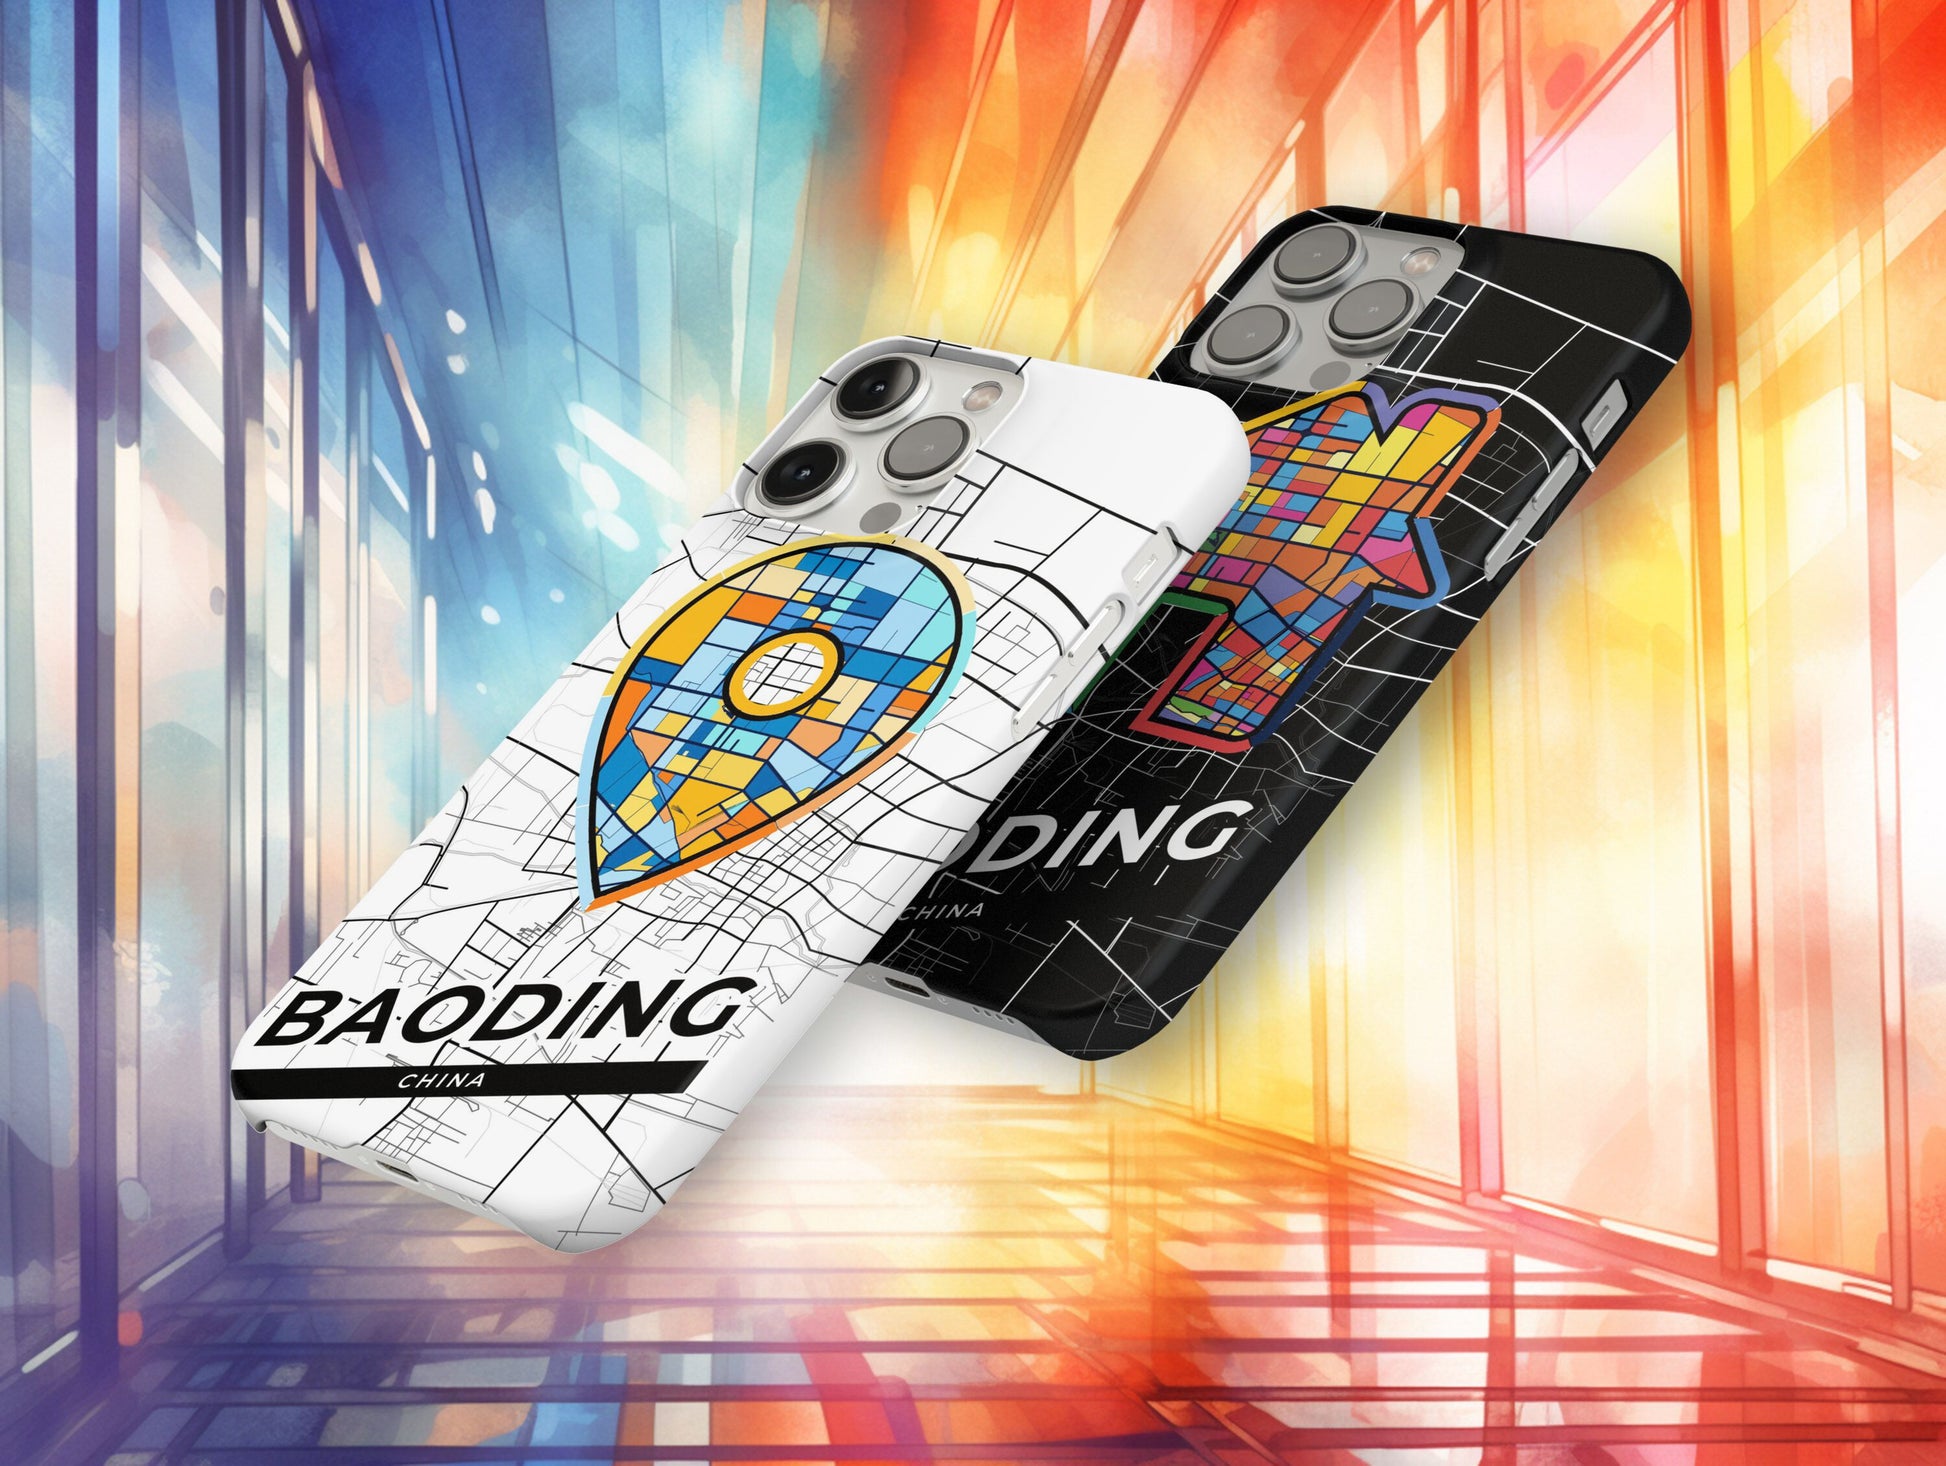 Baoding China slim phone case with colorful icon. Birthday, wedding or housewarming gift. Couple match cases.